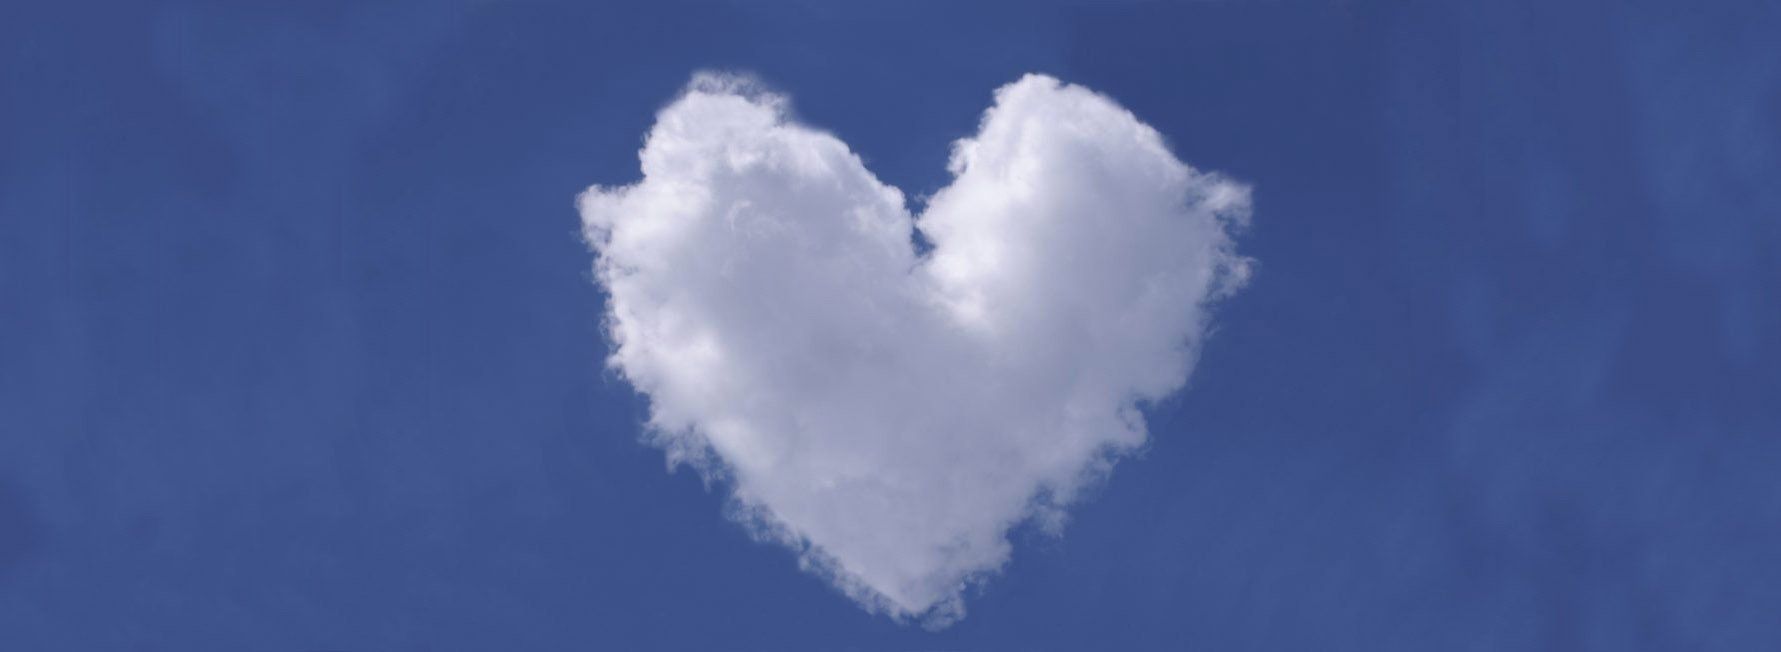 Image of a heart-shaped cloud in a blue sky